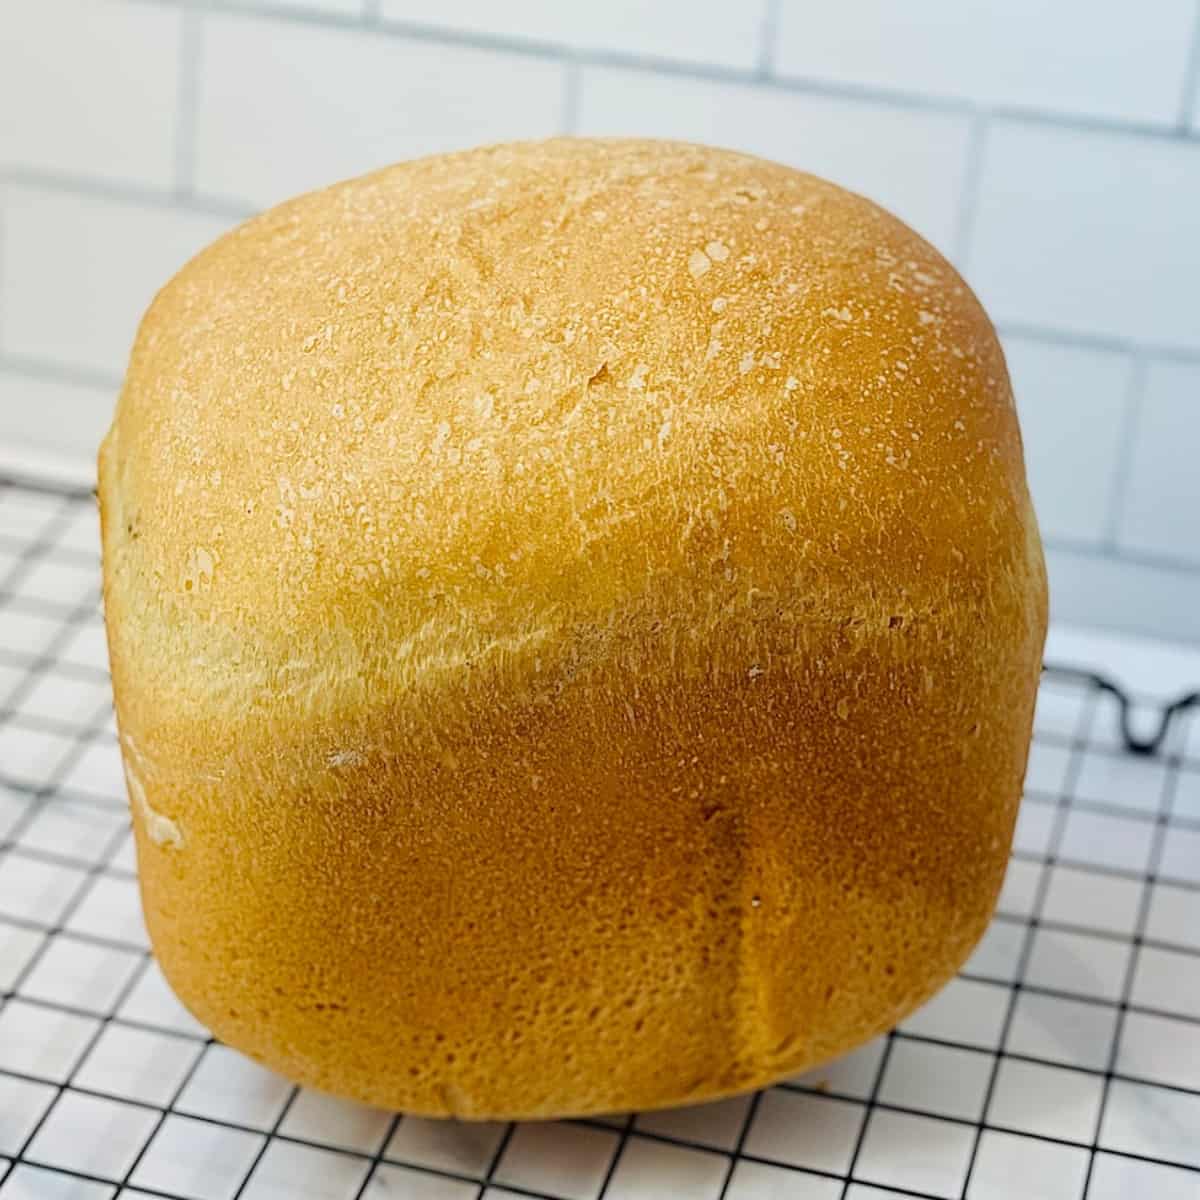 Basic Bread Machine White Bread You'll Be Eager To Share